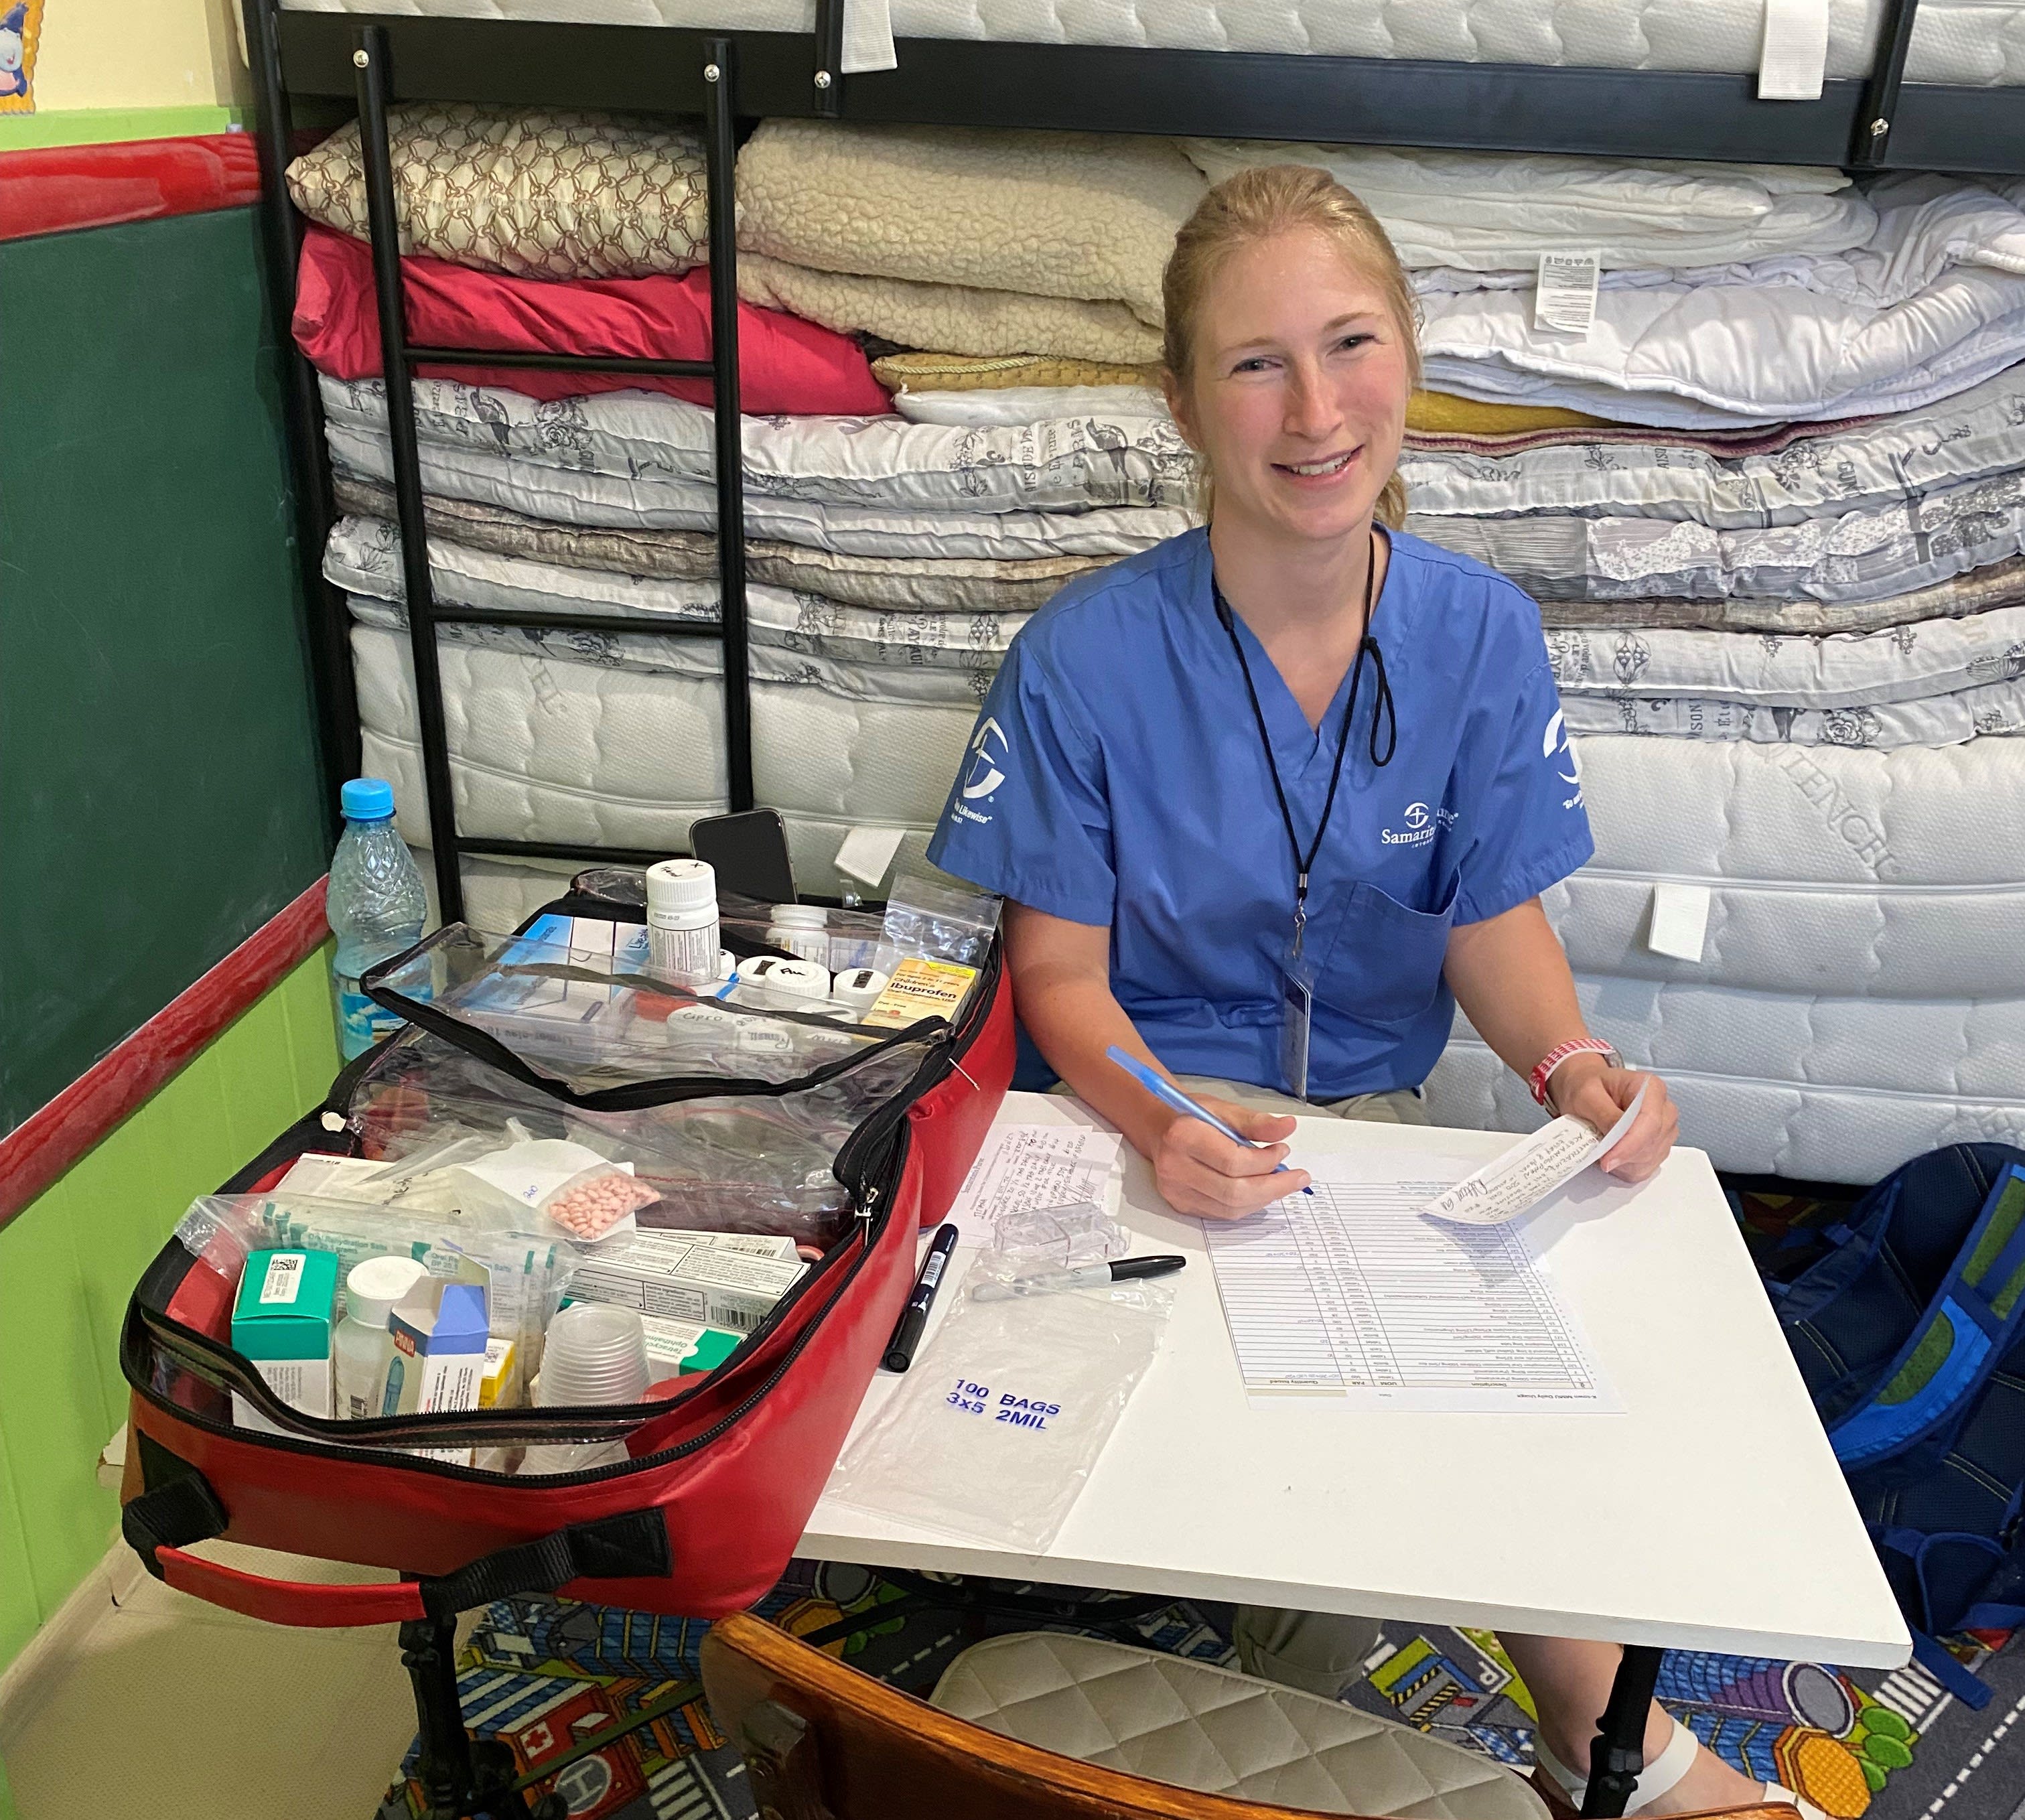 A woman with a bag of medicine does paperwork and smiles for the camera